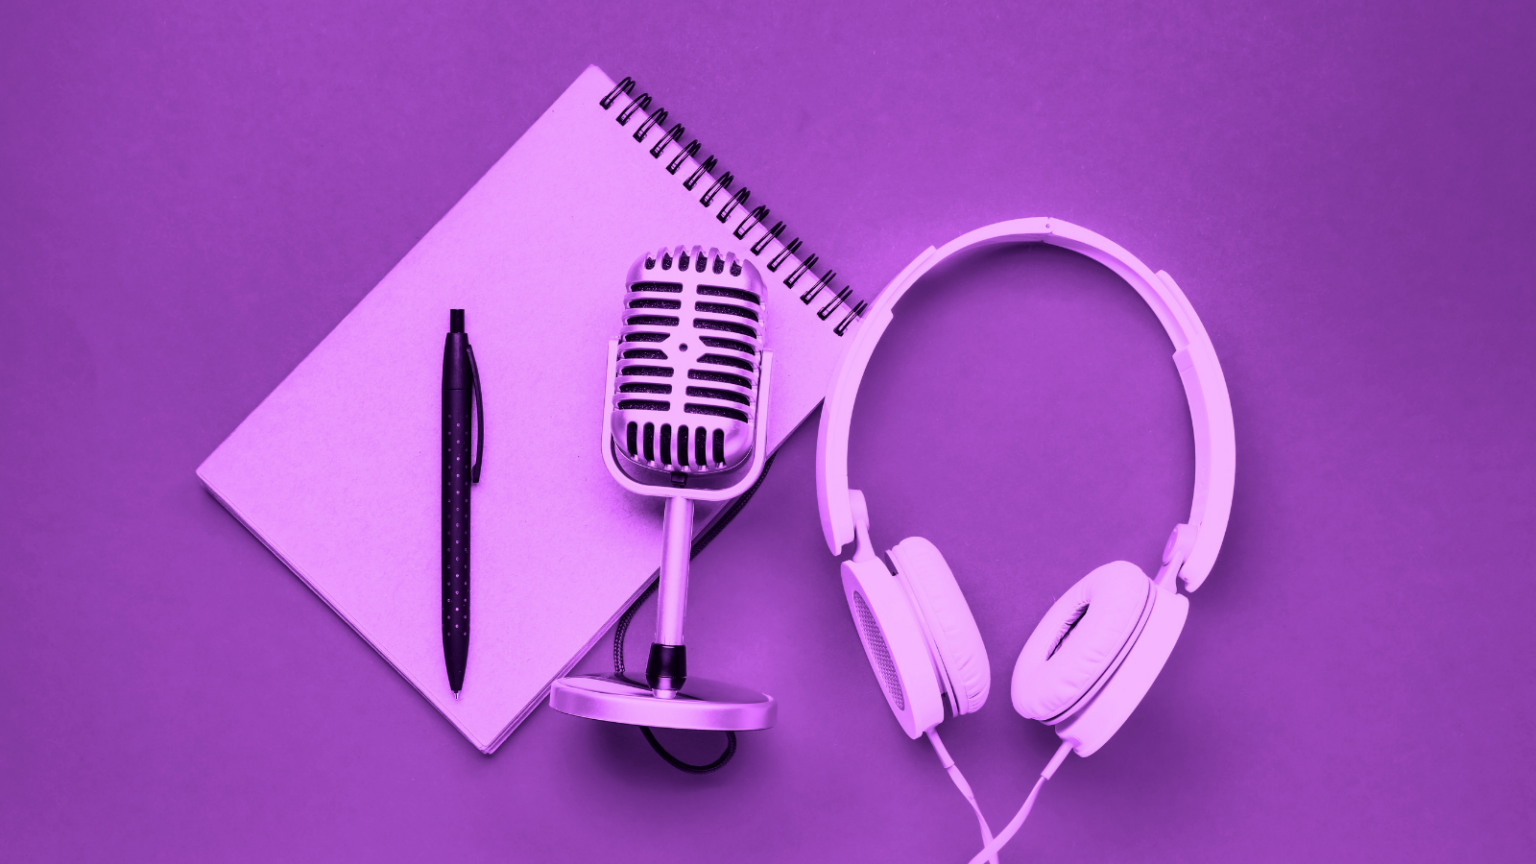 Headphones, microphone, notebook, and pen on purple background